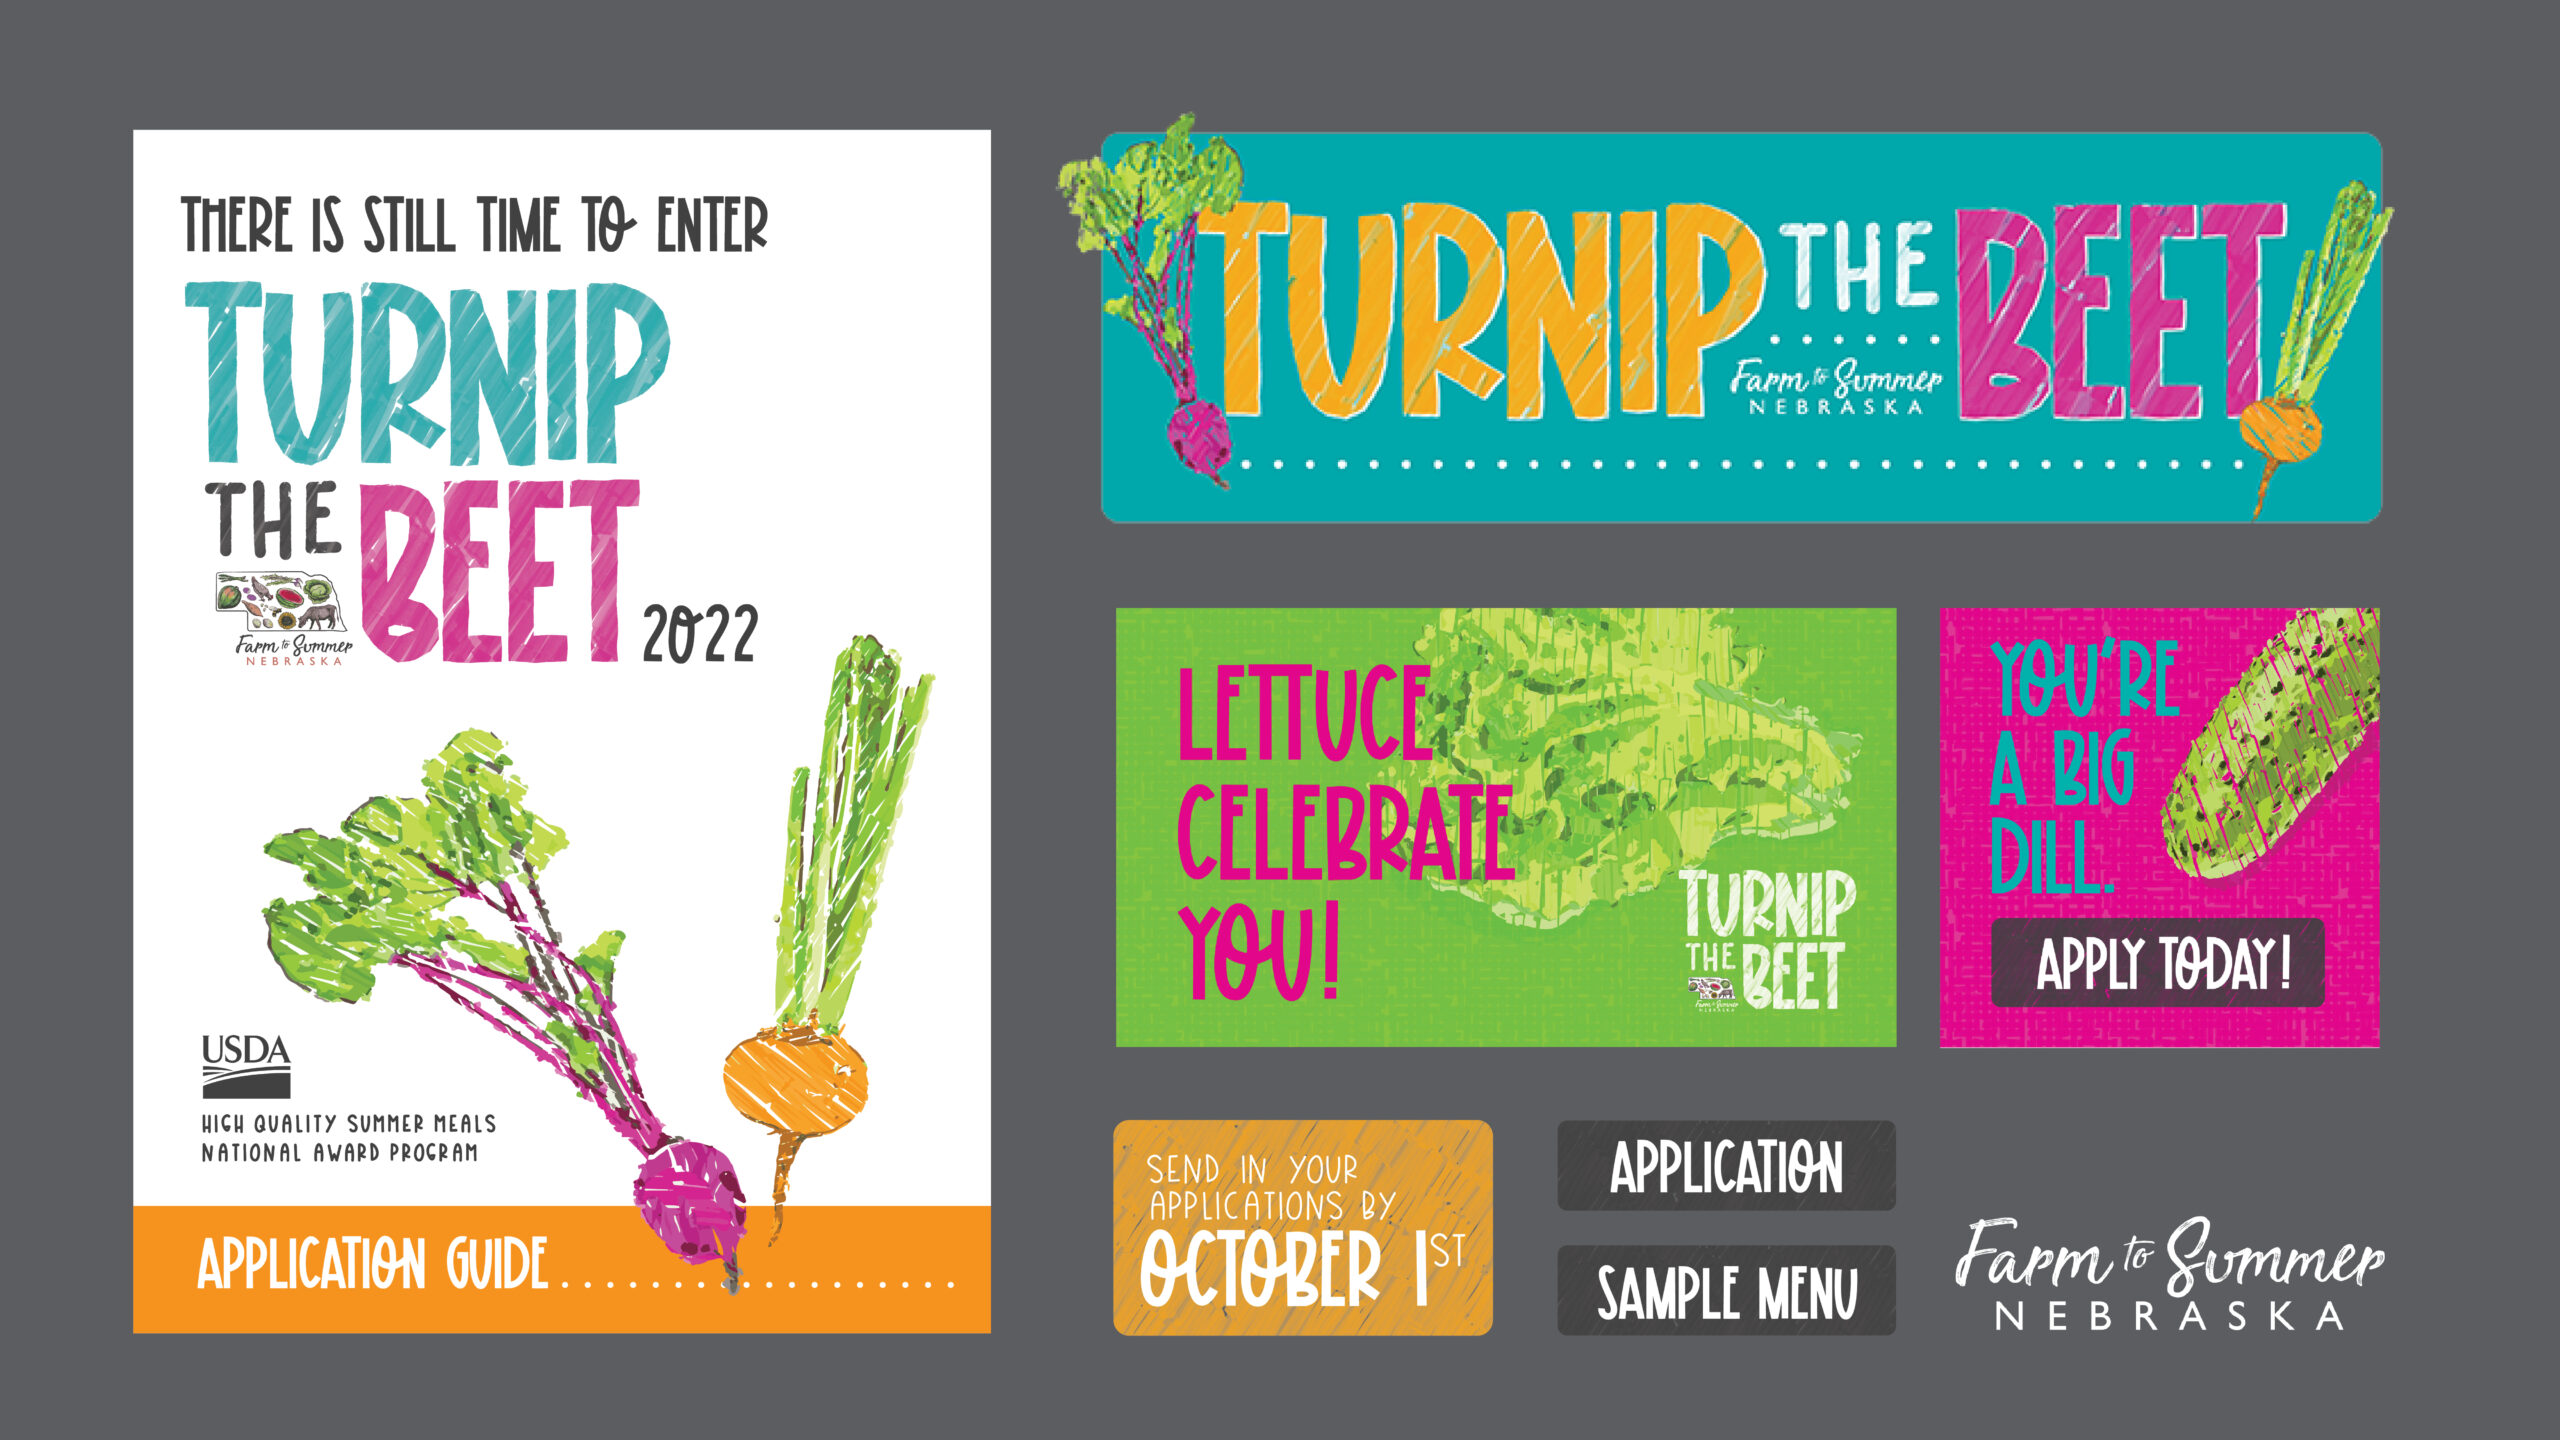 Colorful Turnip the Beet graphics utilizing bright colors and various vegetables atop a grey background.